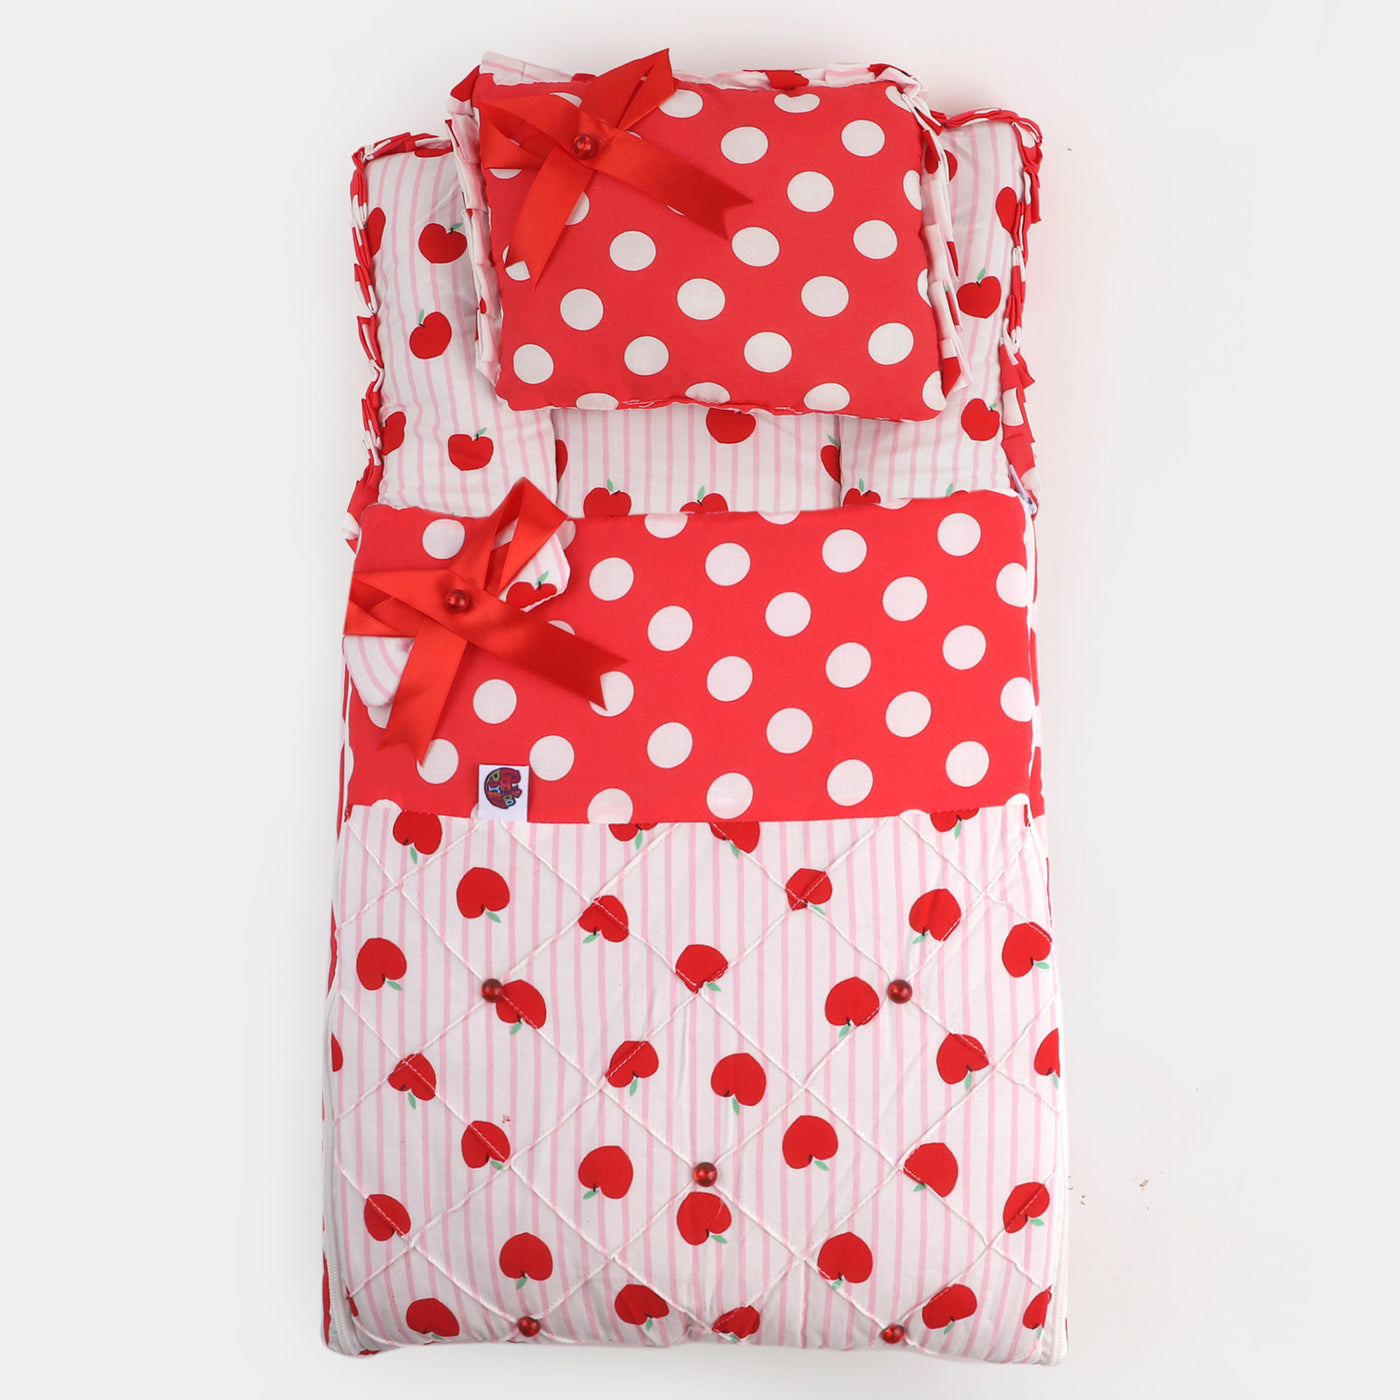 Baby Carry Nest Fancy With Pillow Red